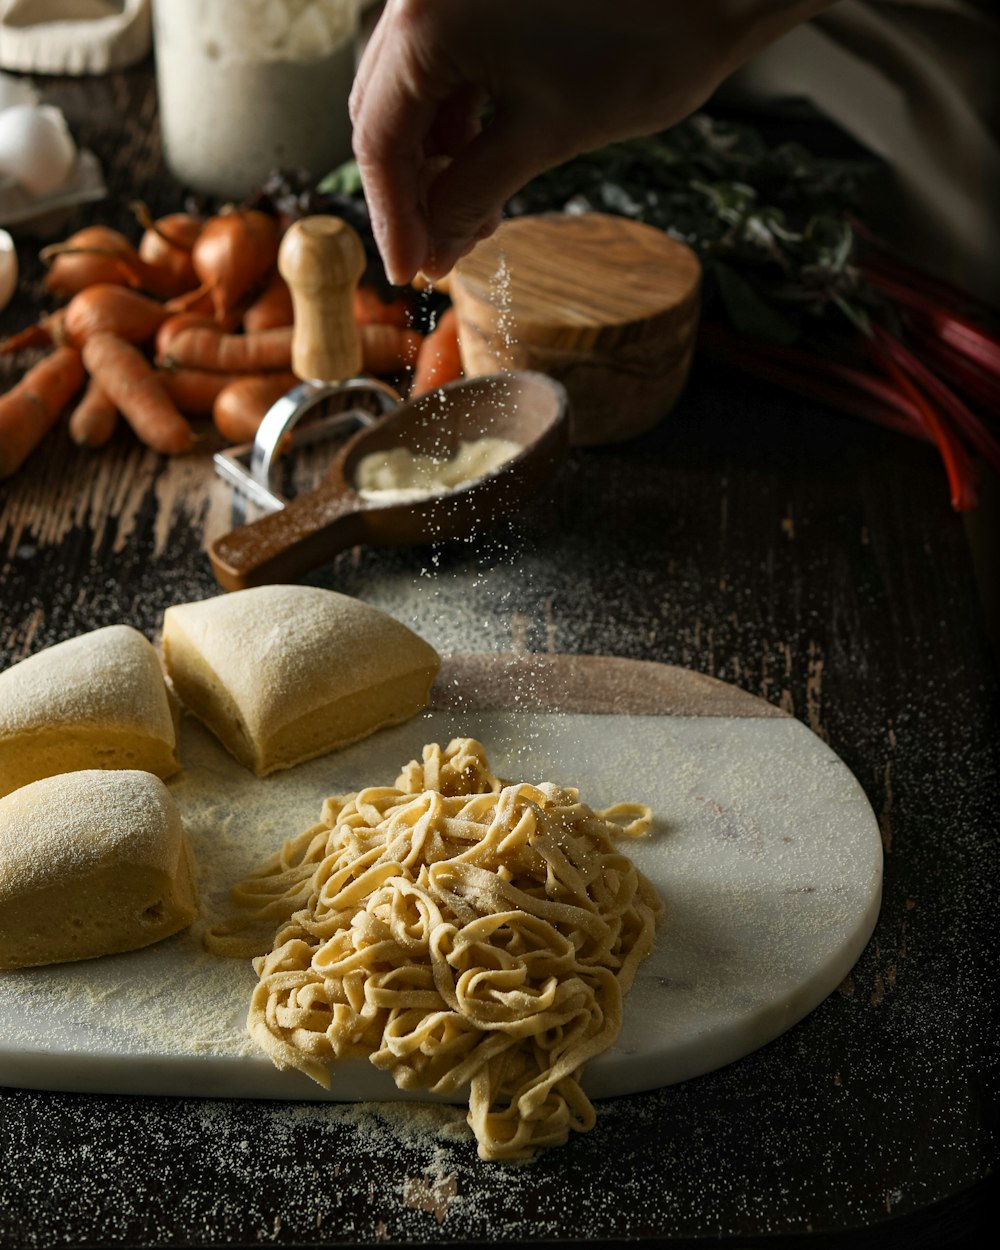 pasta on brown wooden chopping board photo – Free Food Image on Unsplash